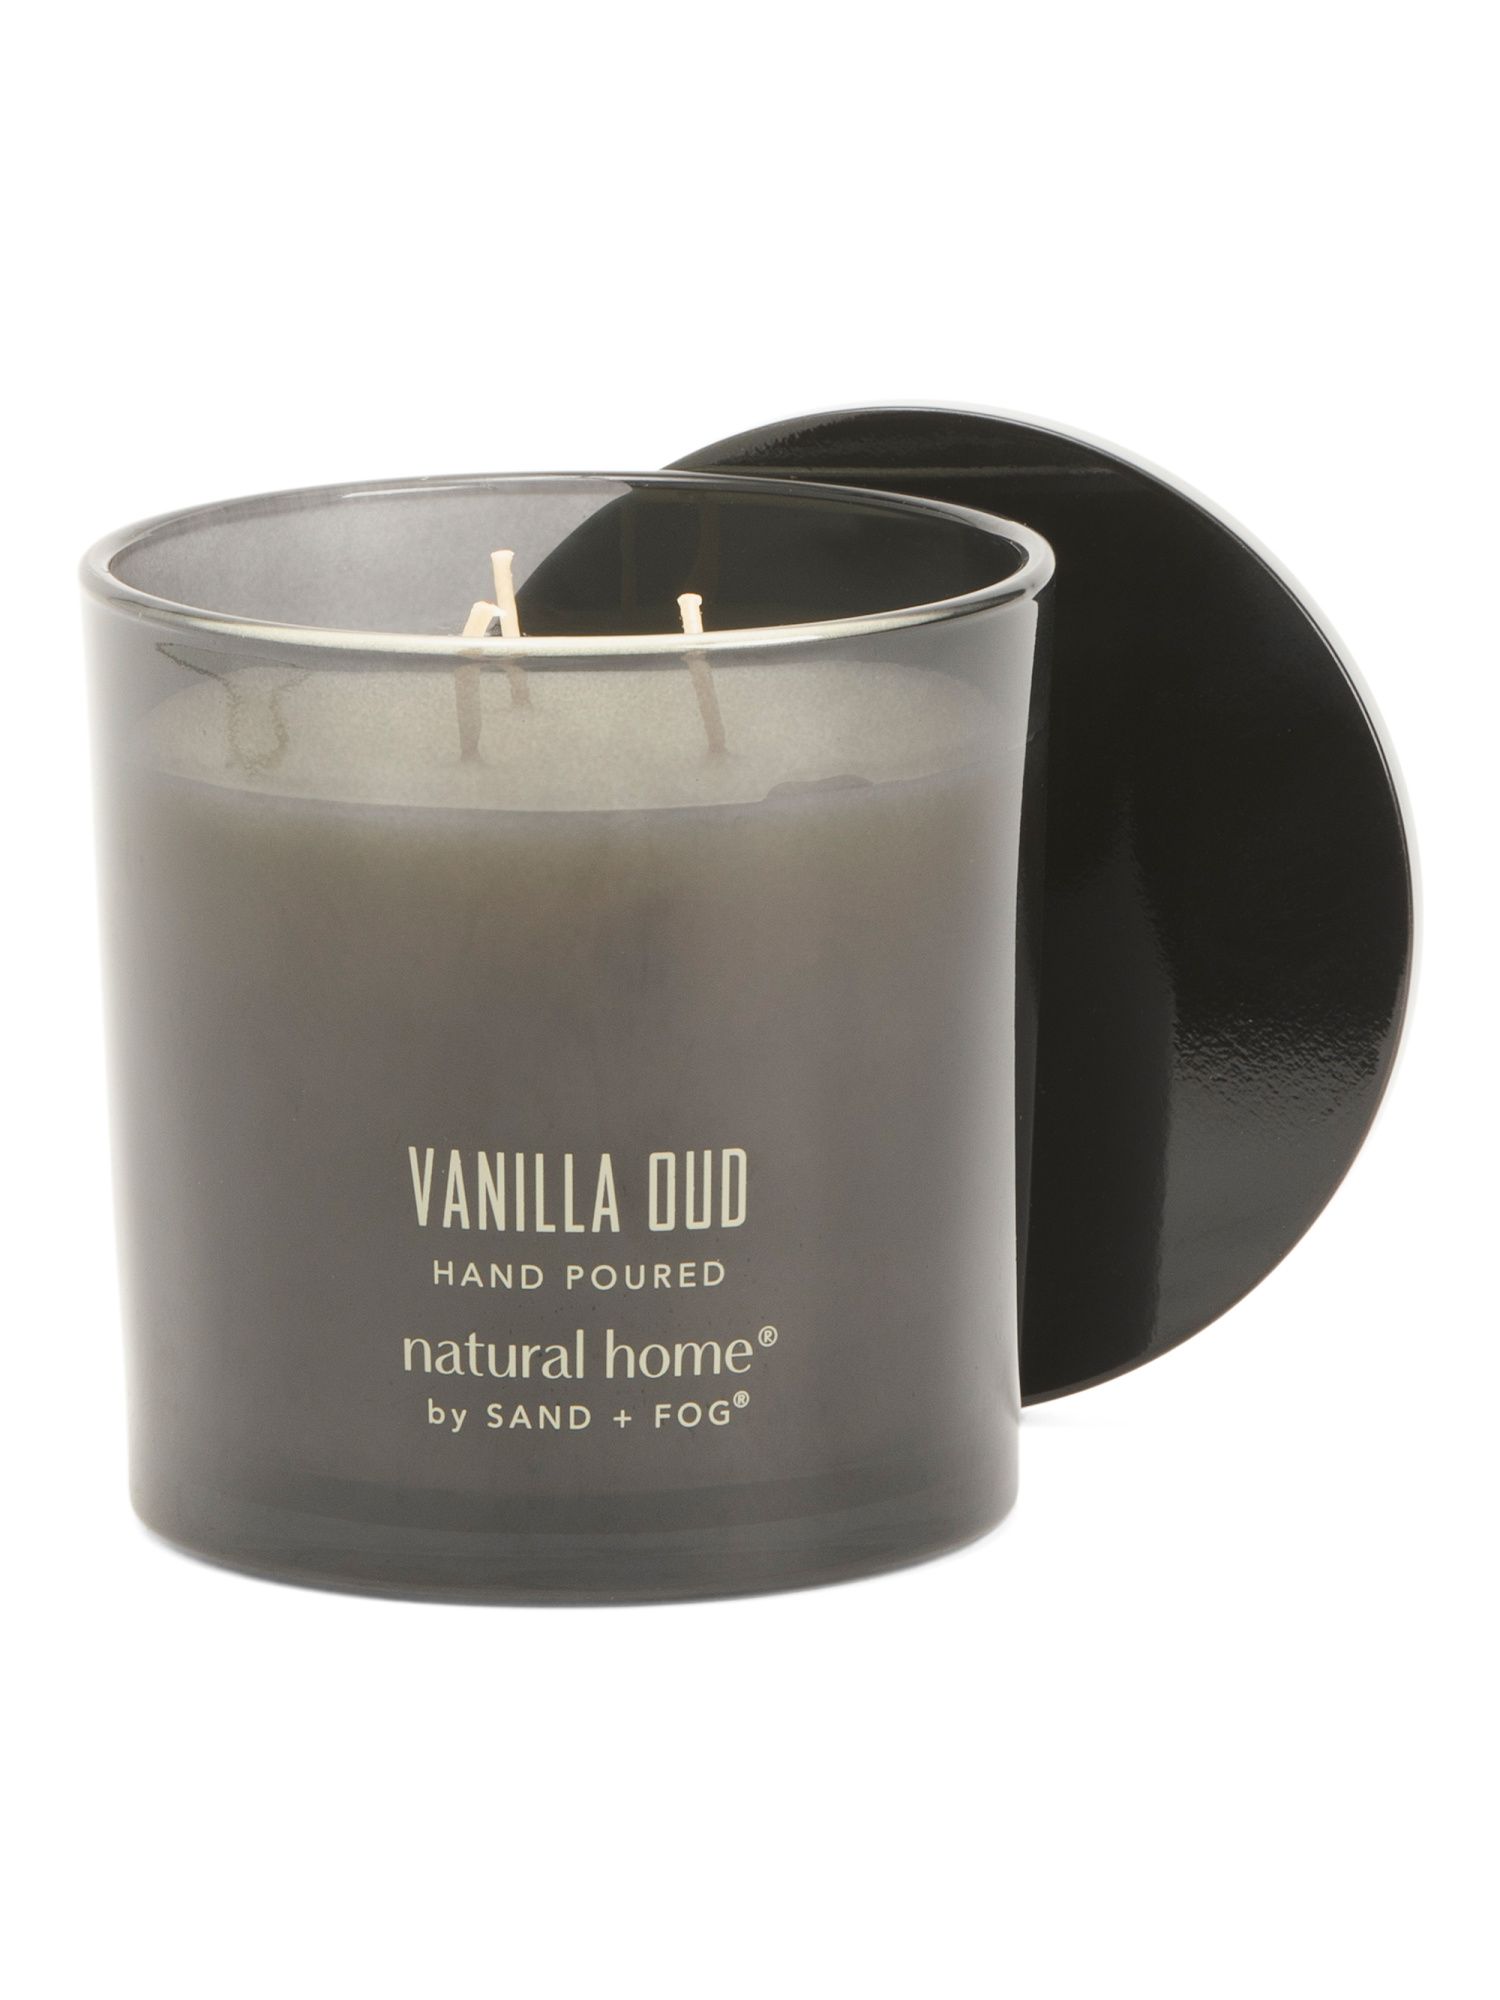 21oz Vanilla Oud Candle | Mother's Day Gifts | Marshalls | Marshalls